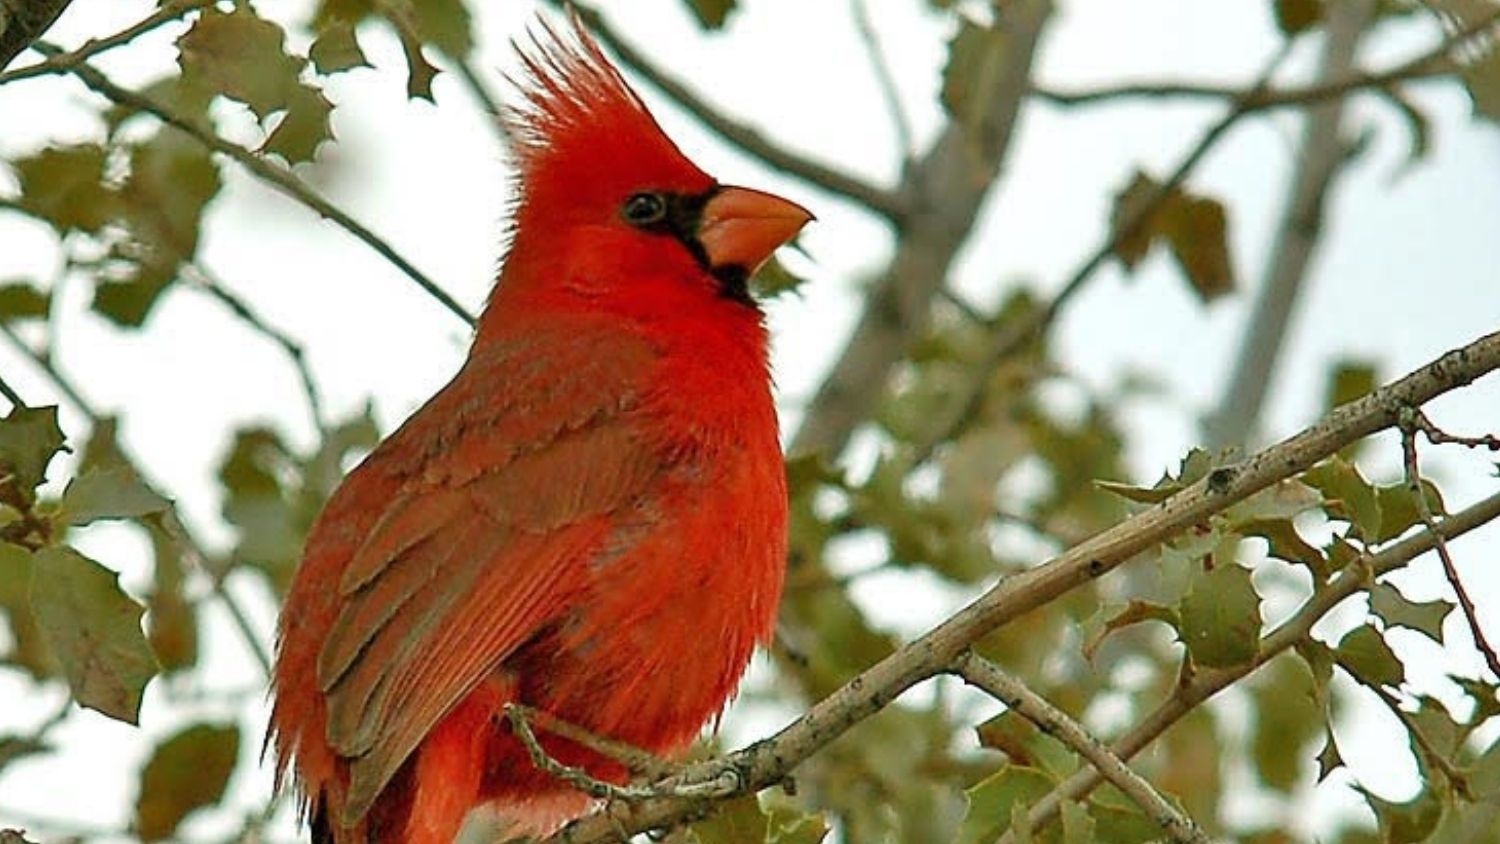 Cardinal on Tree - Noise and Light Pollution Impact Songbird Reproduction - Parks, Recreation and Tourism Management at NC State University